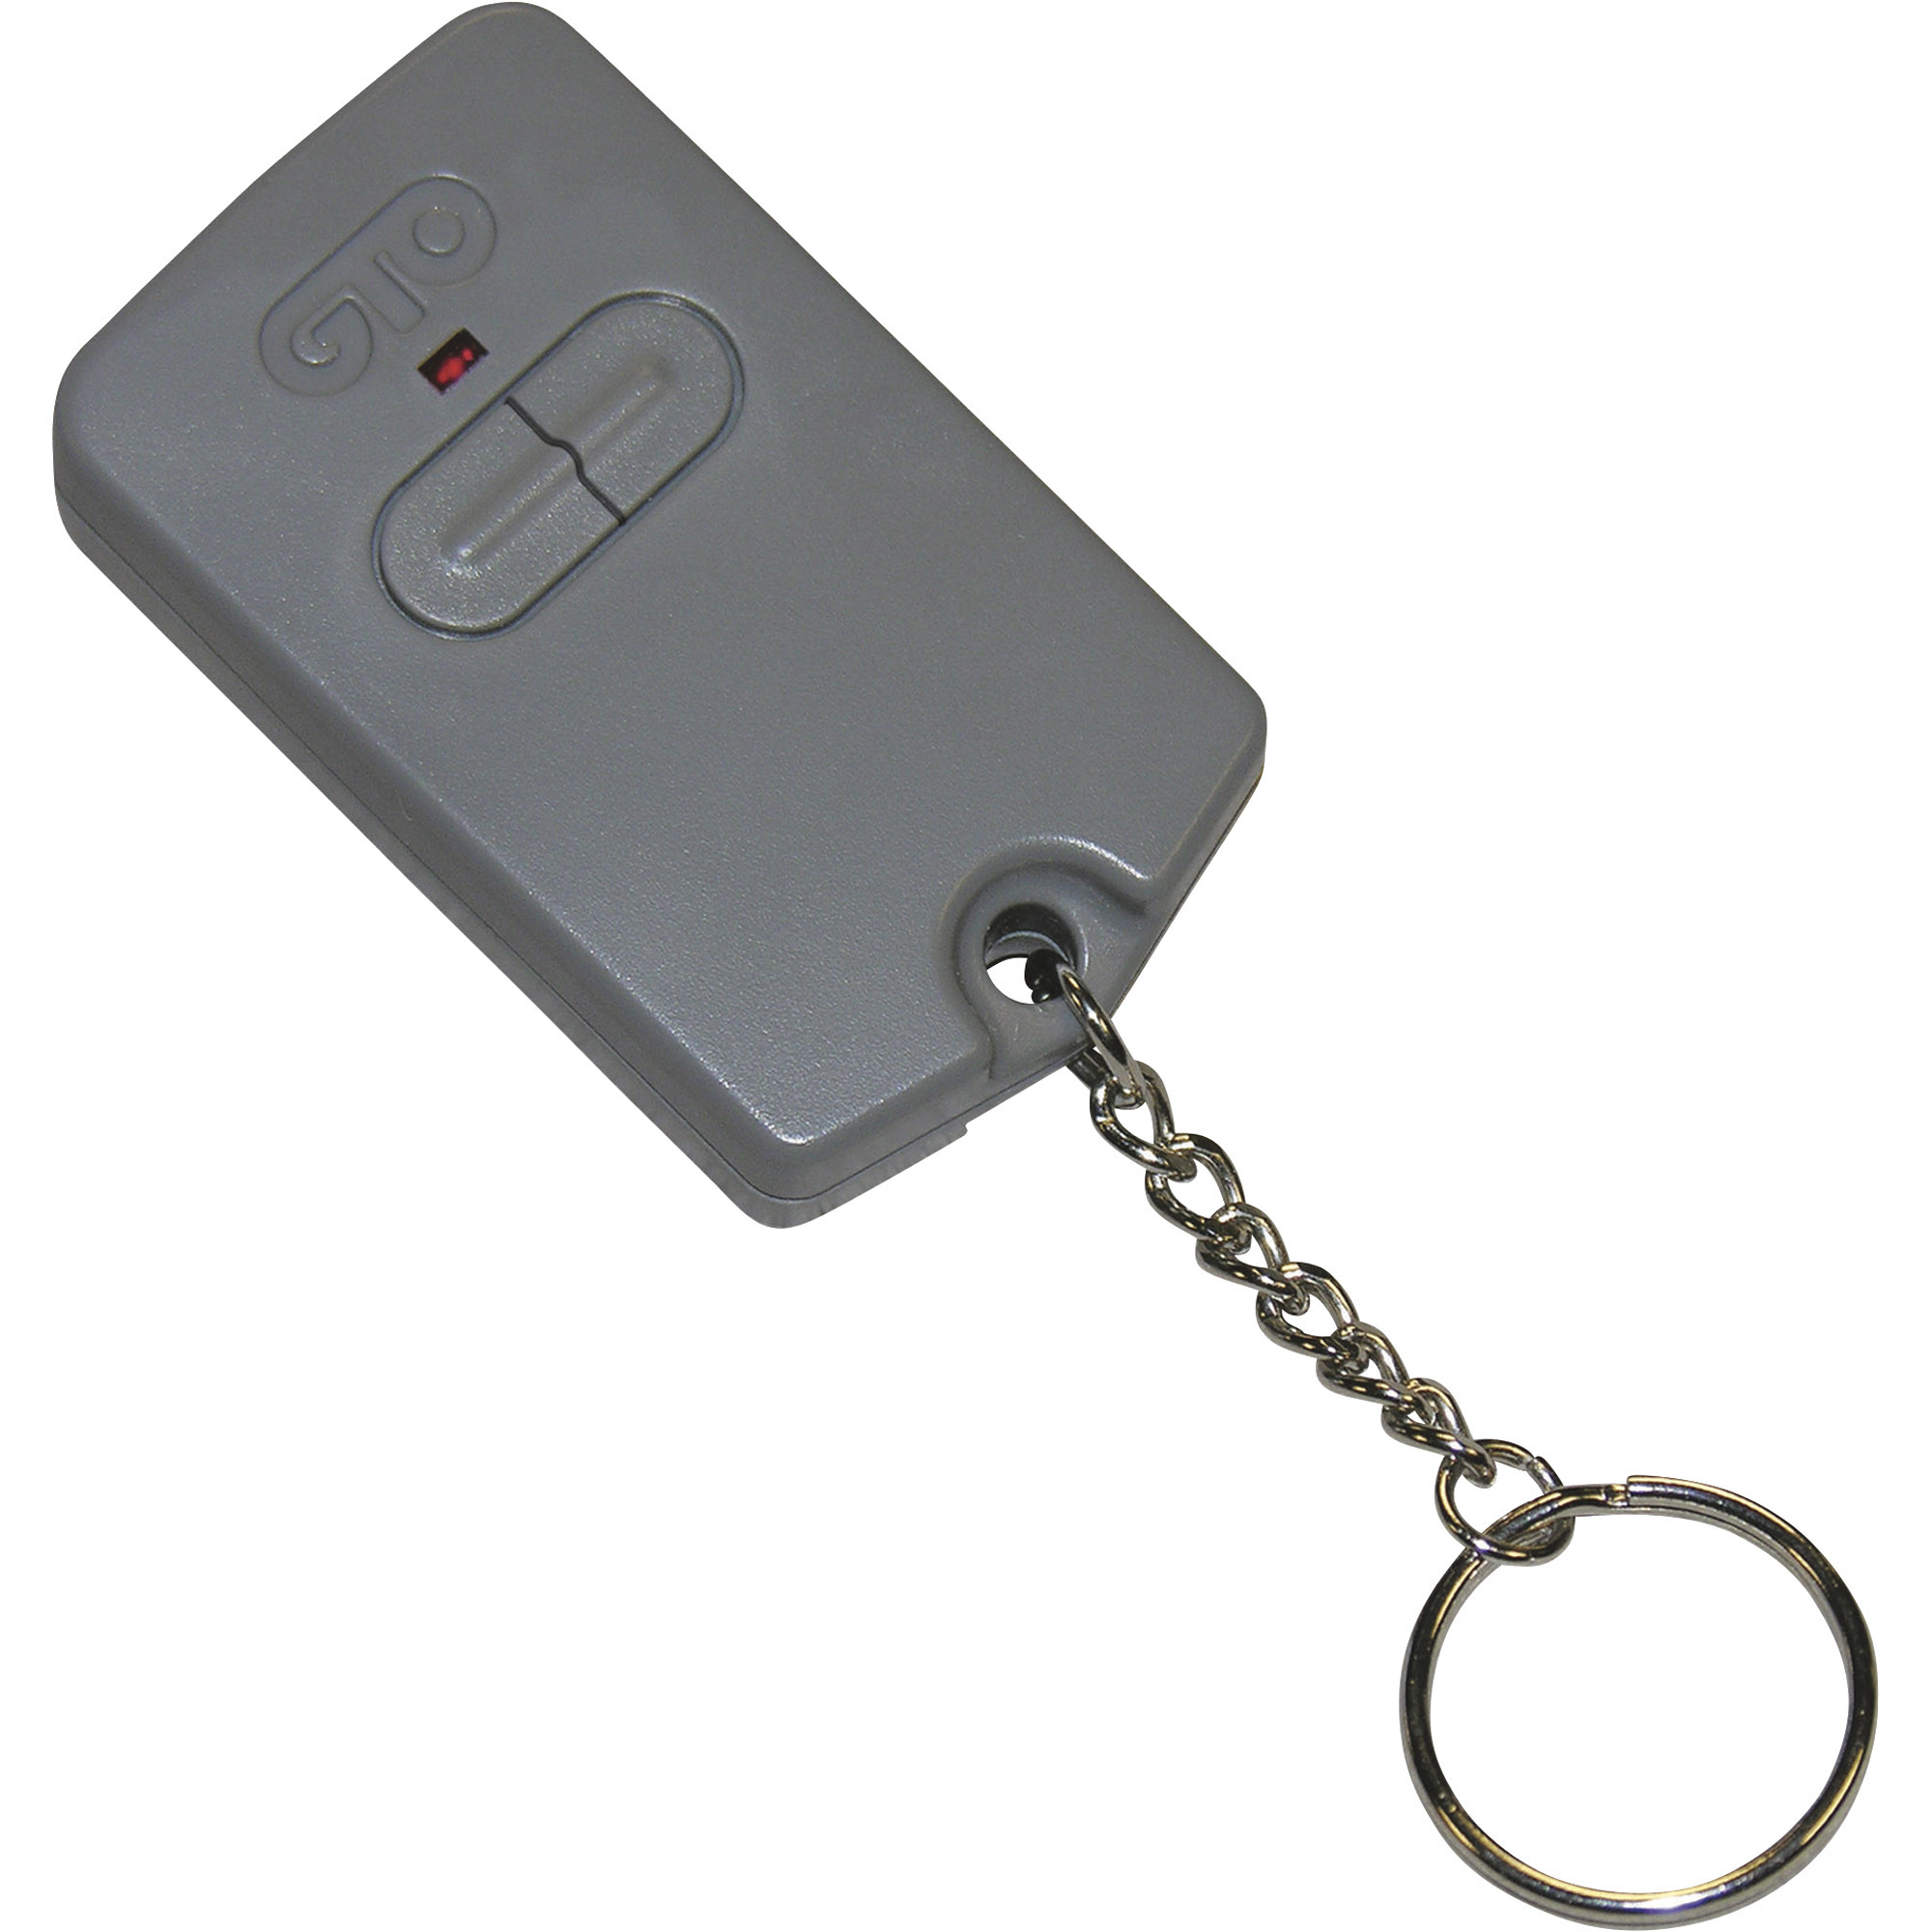 Mighty Mule Two-Button Keychain Transmitter, Model FM134